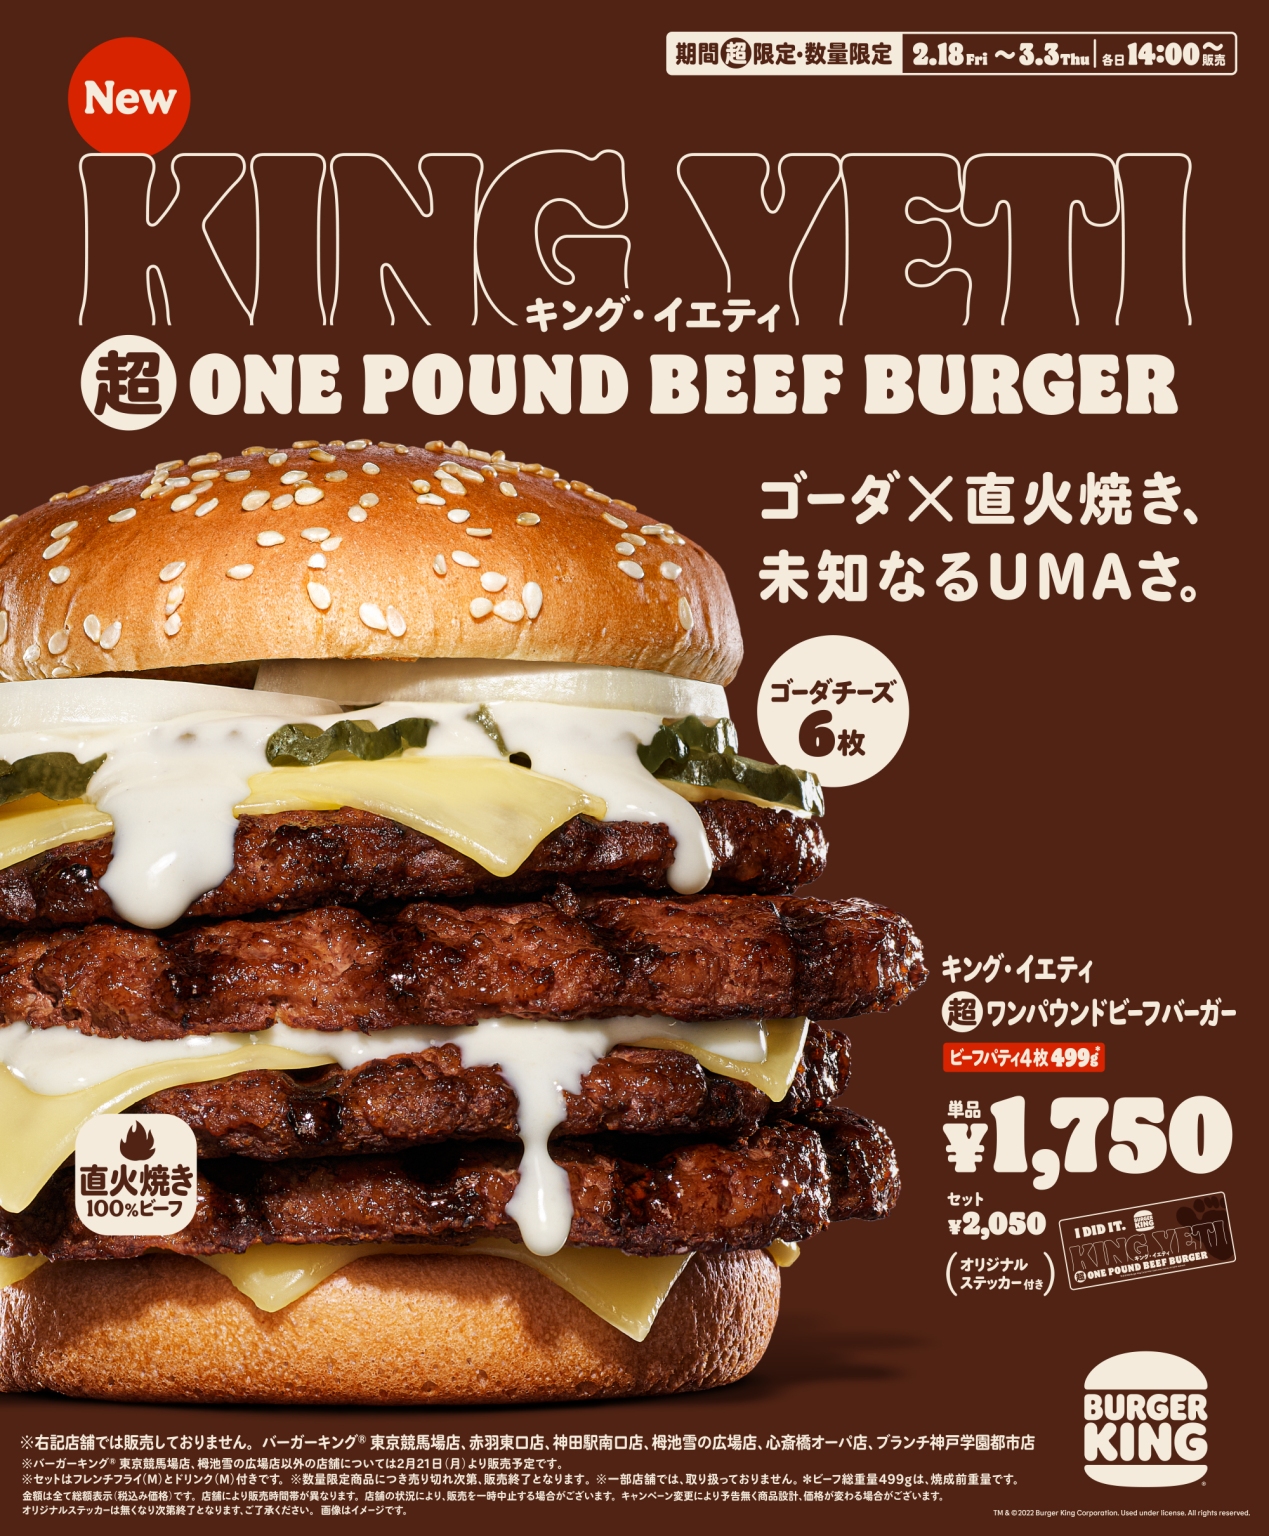 Burger-King-Japan-Yeti-One-pound-beef-limited-edition-menu-fast-food-exclusive-news-photos-1.jpg